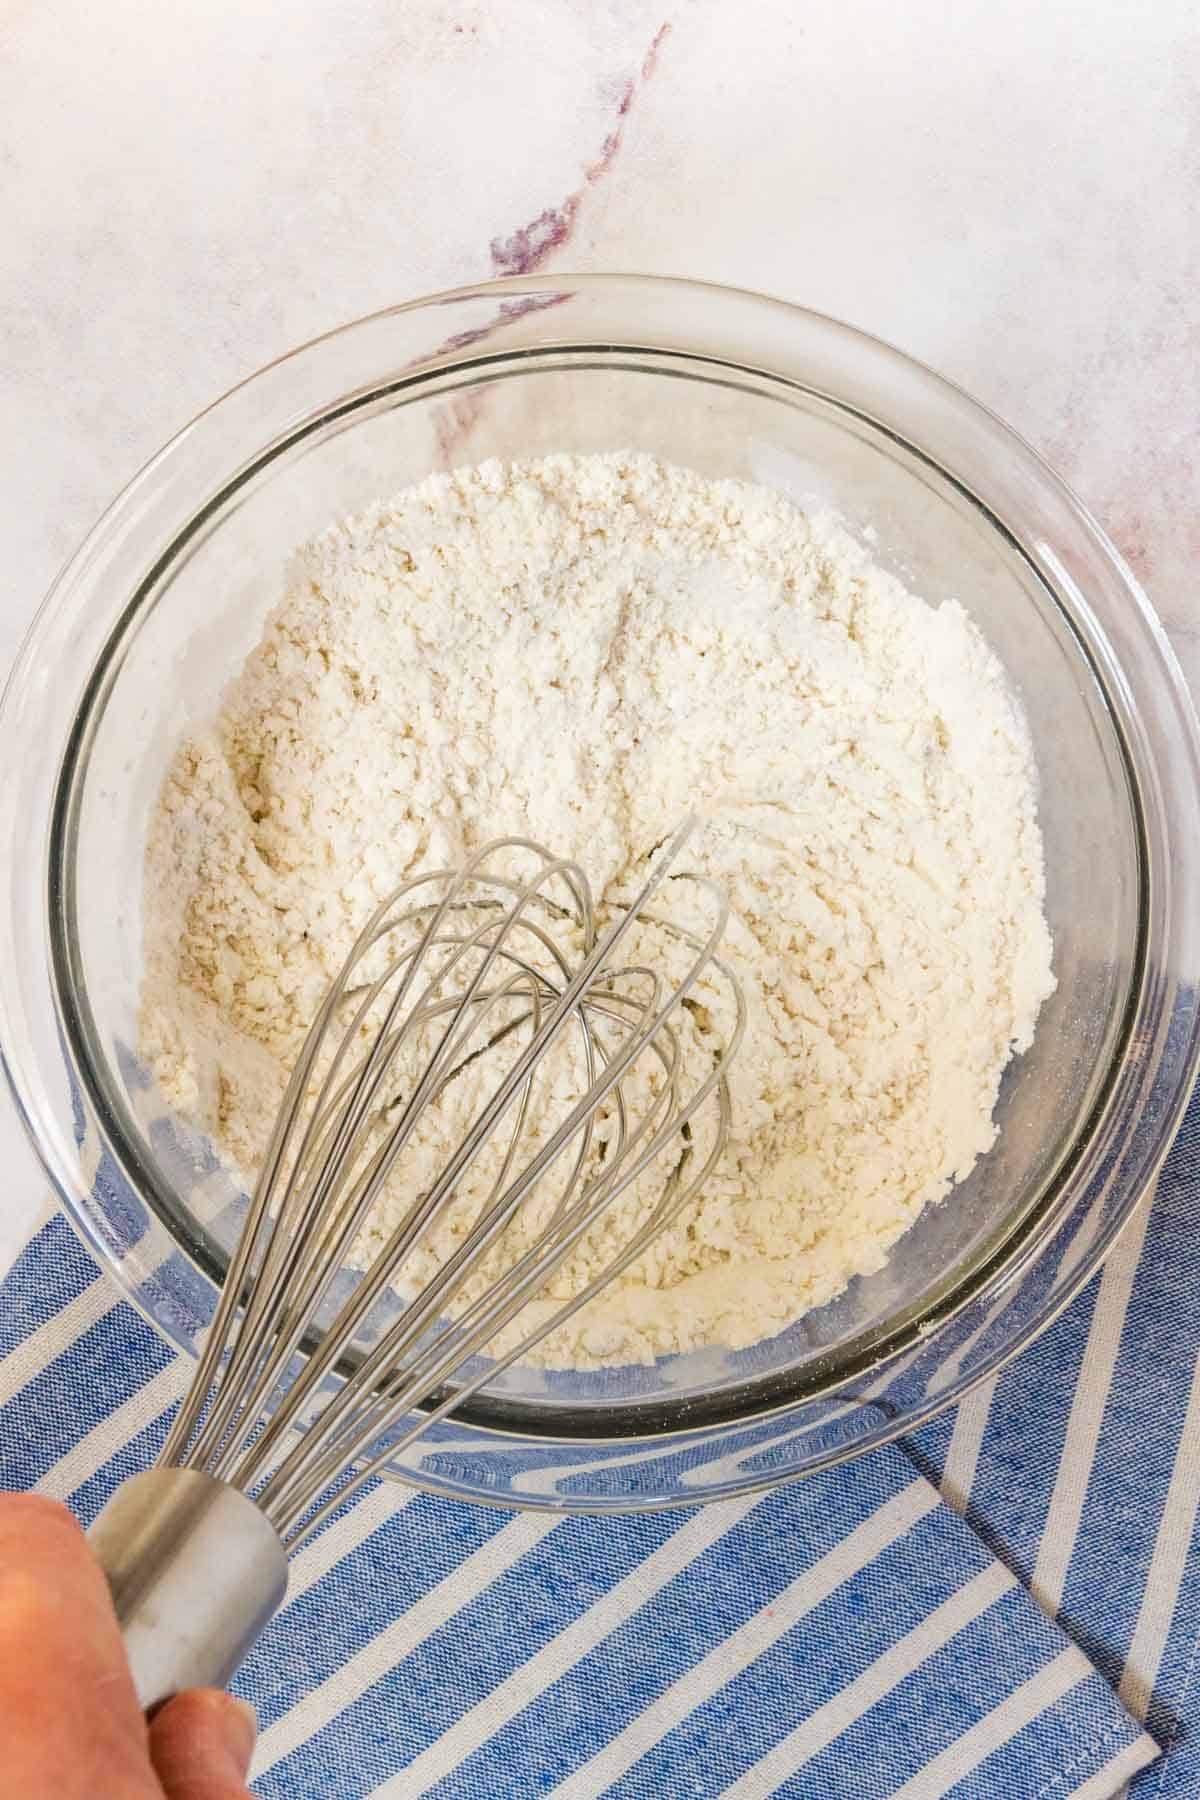 Dry pancake ingredients are whisked together in a glass mixing bowl.